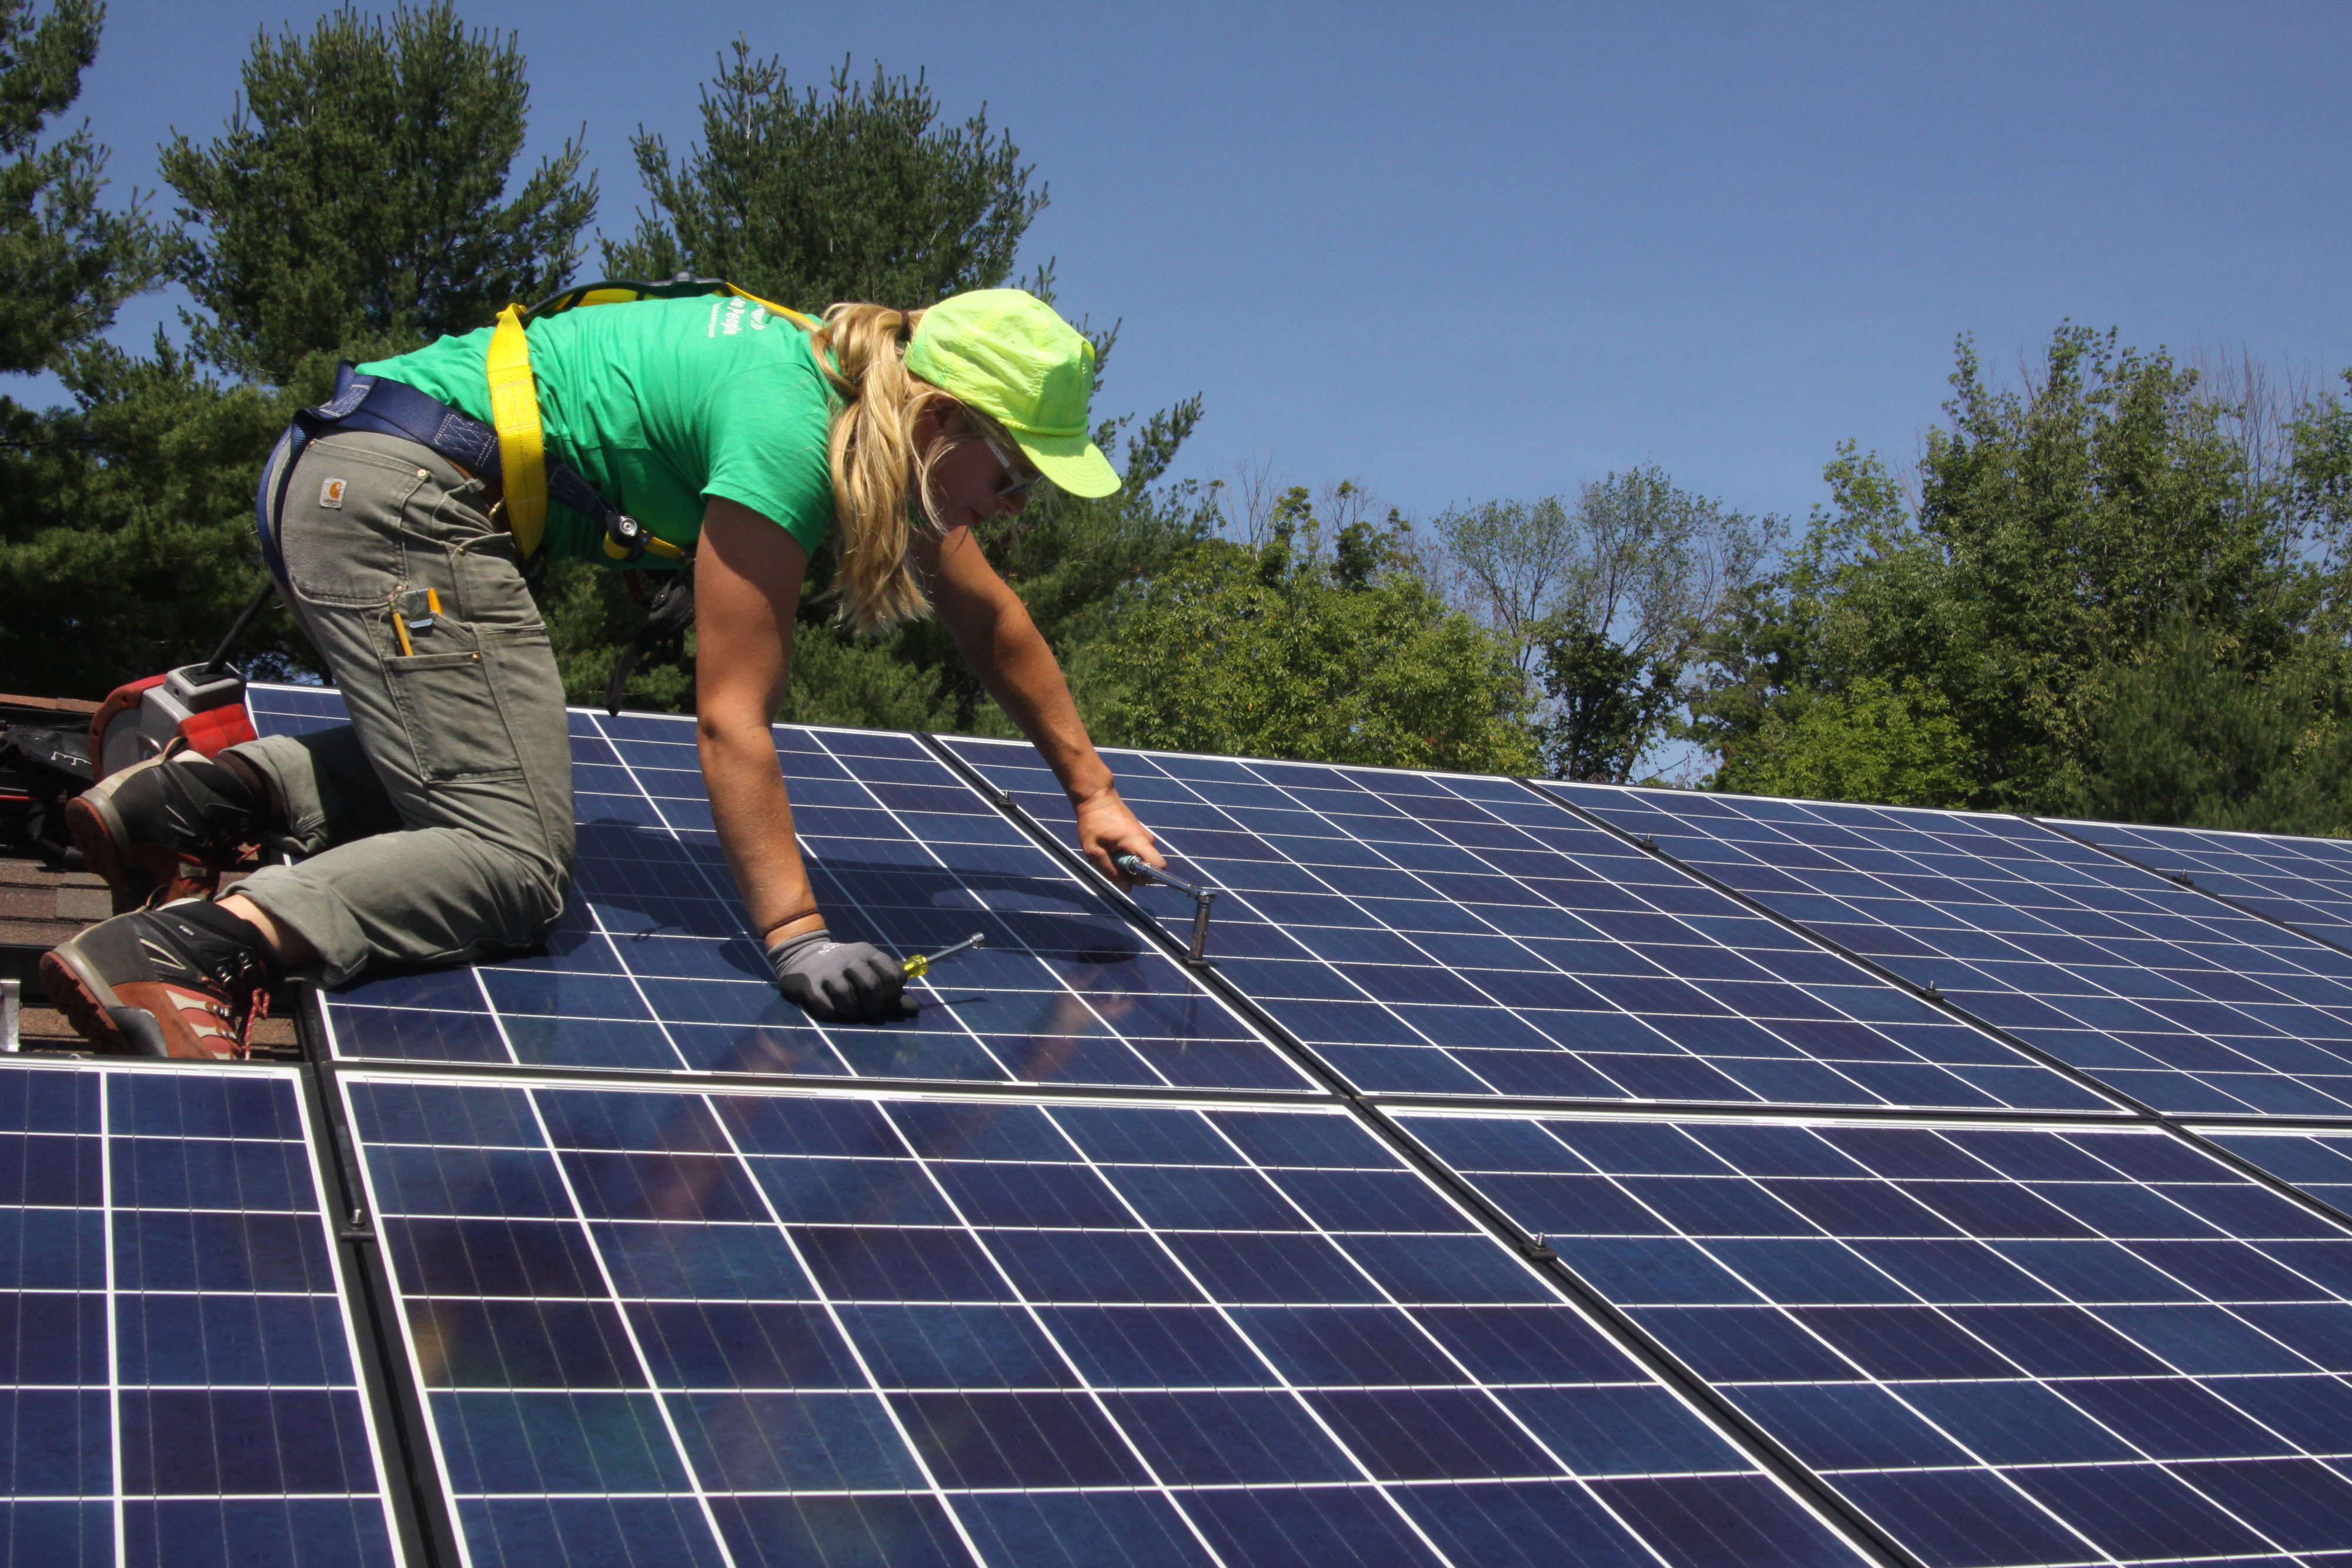 A solar energy installer working on a solar panel with green trees in the background.